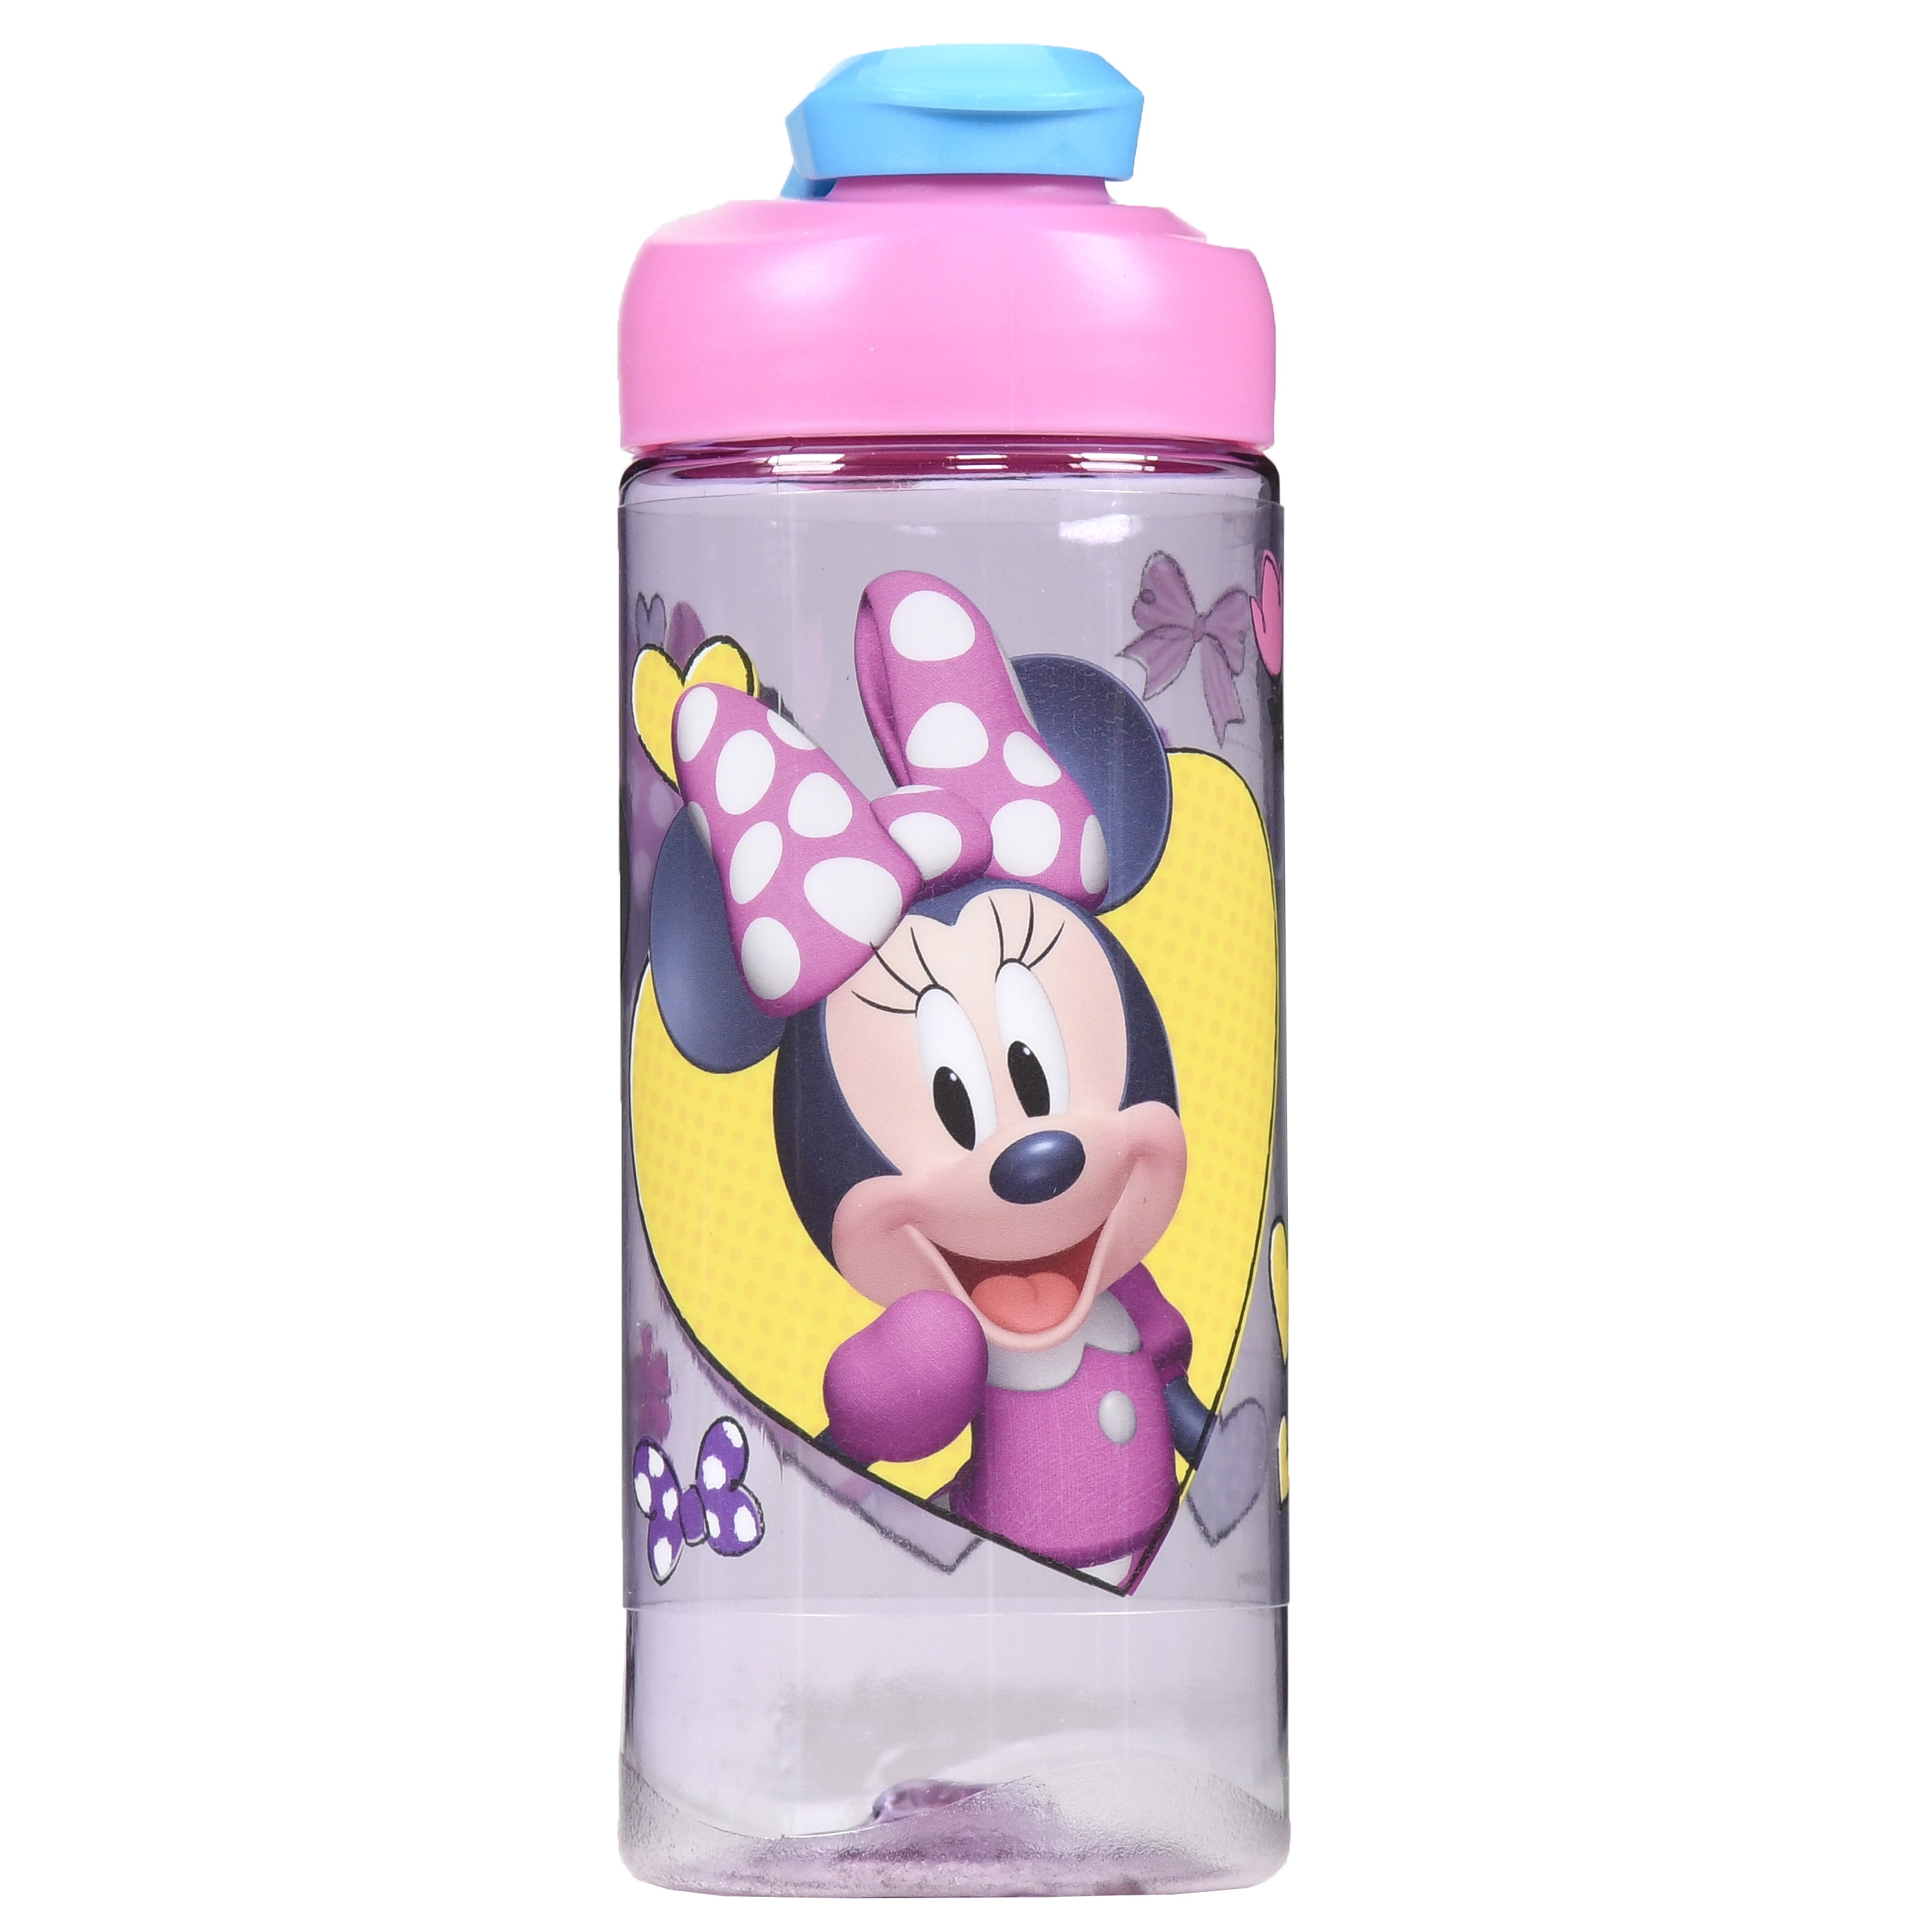 Water bottle with Carry Loop Details about   2 Minnie Mouse16.5 oz